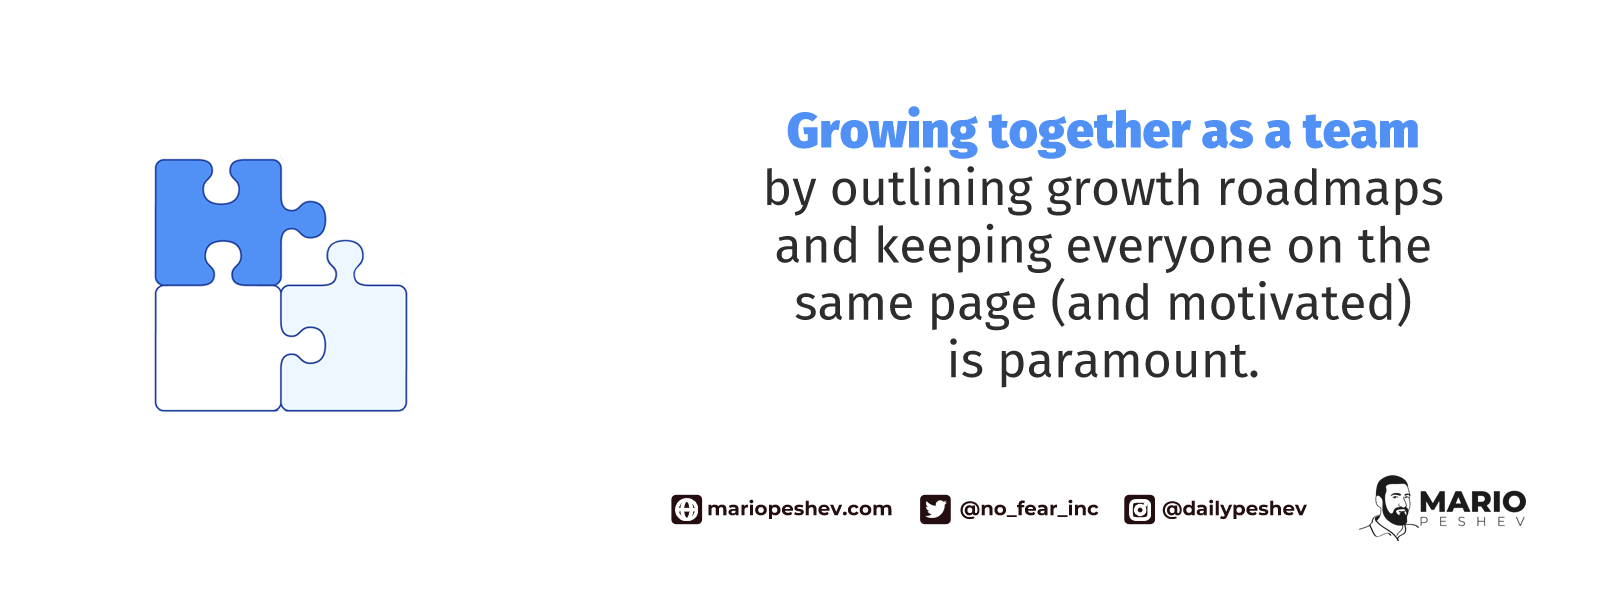 growing together as a team